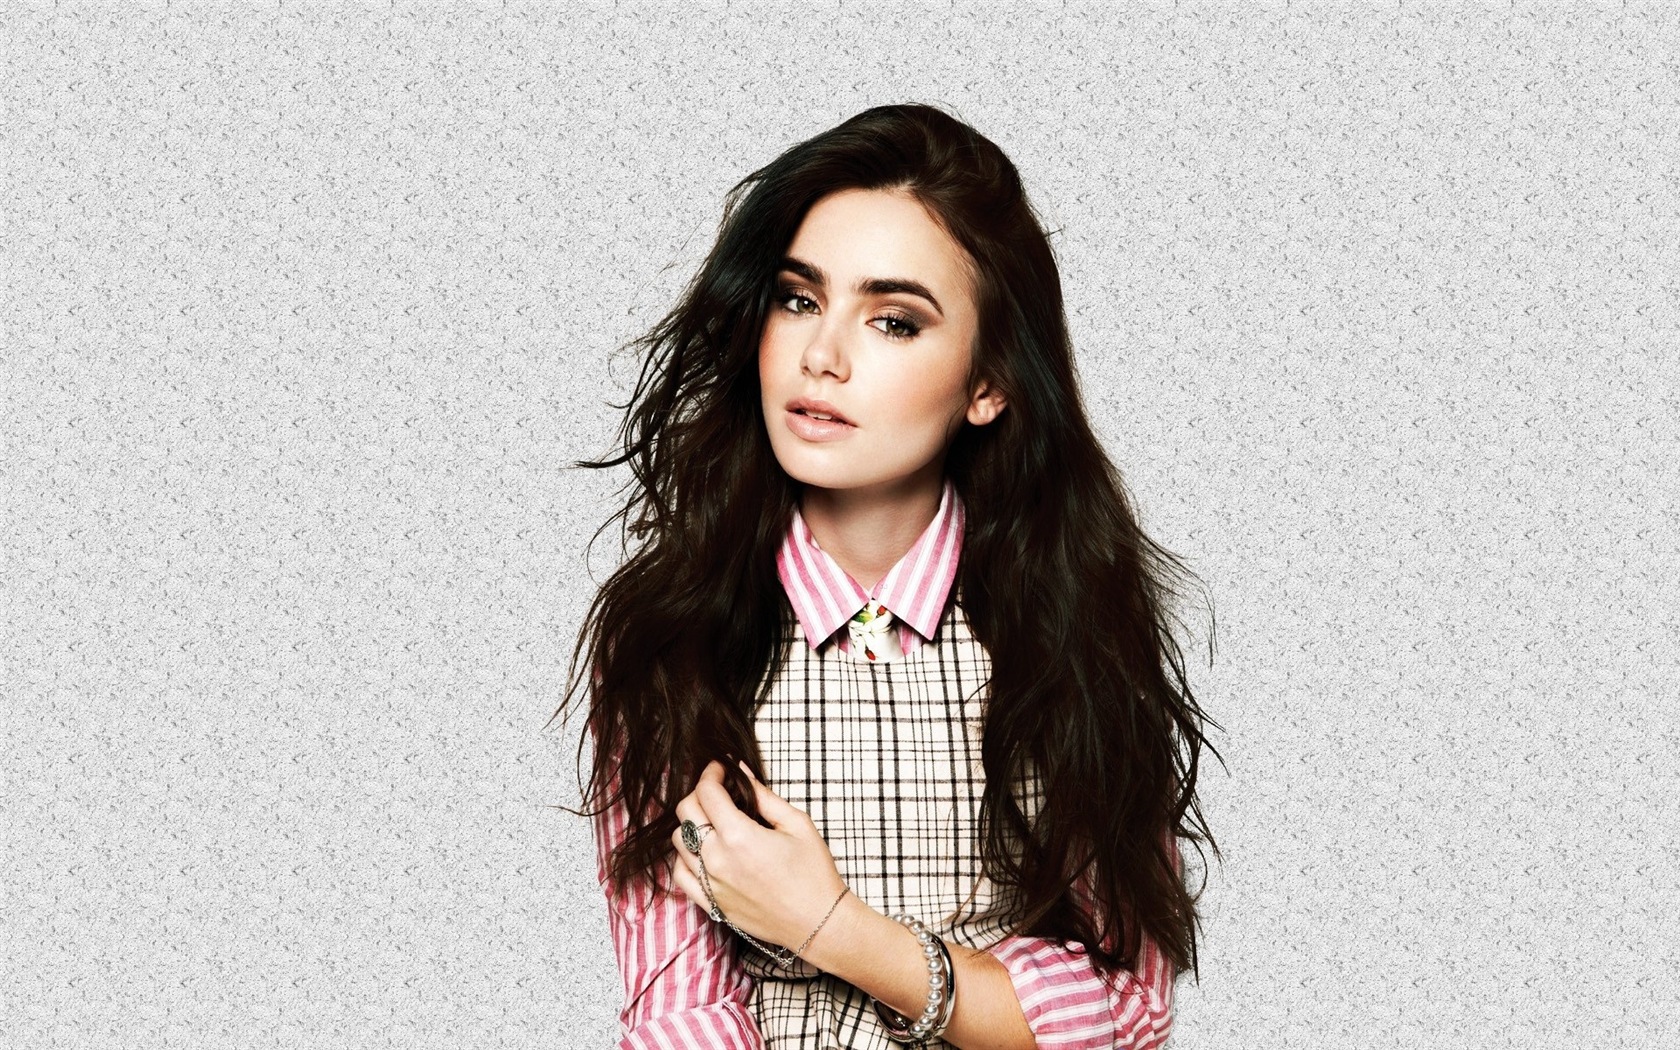 Lily Collins beautiful wallpapers #9 - 1680x1050